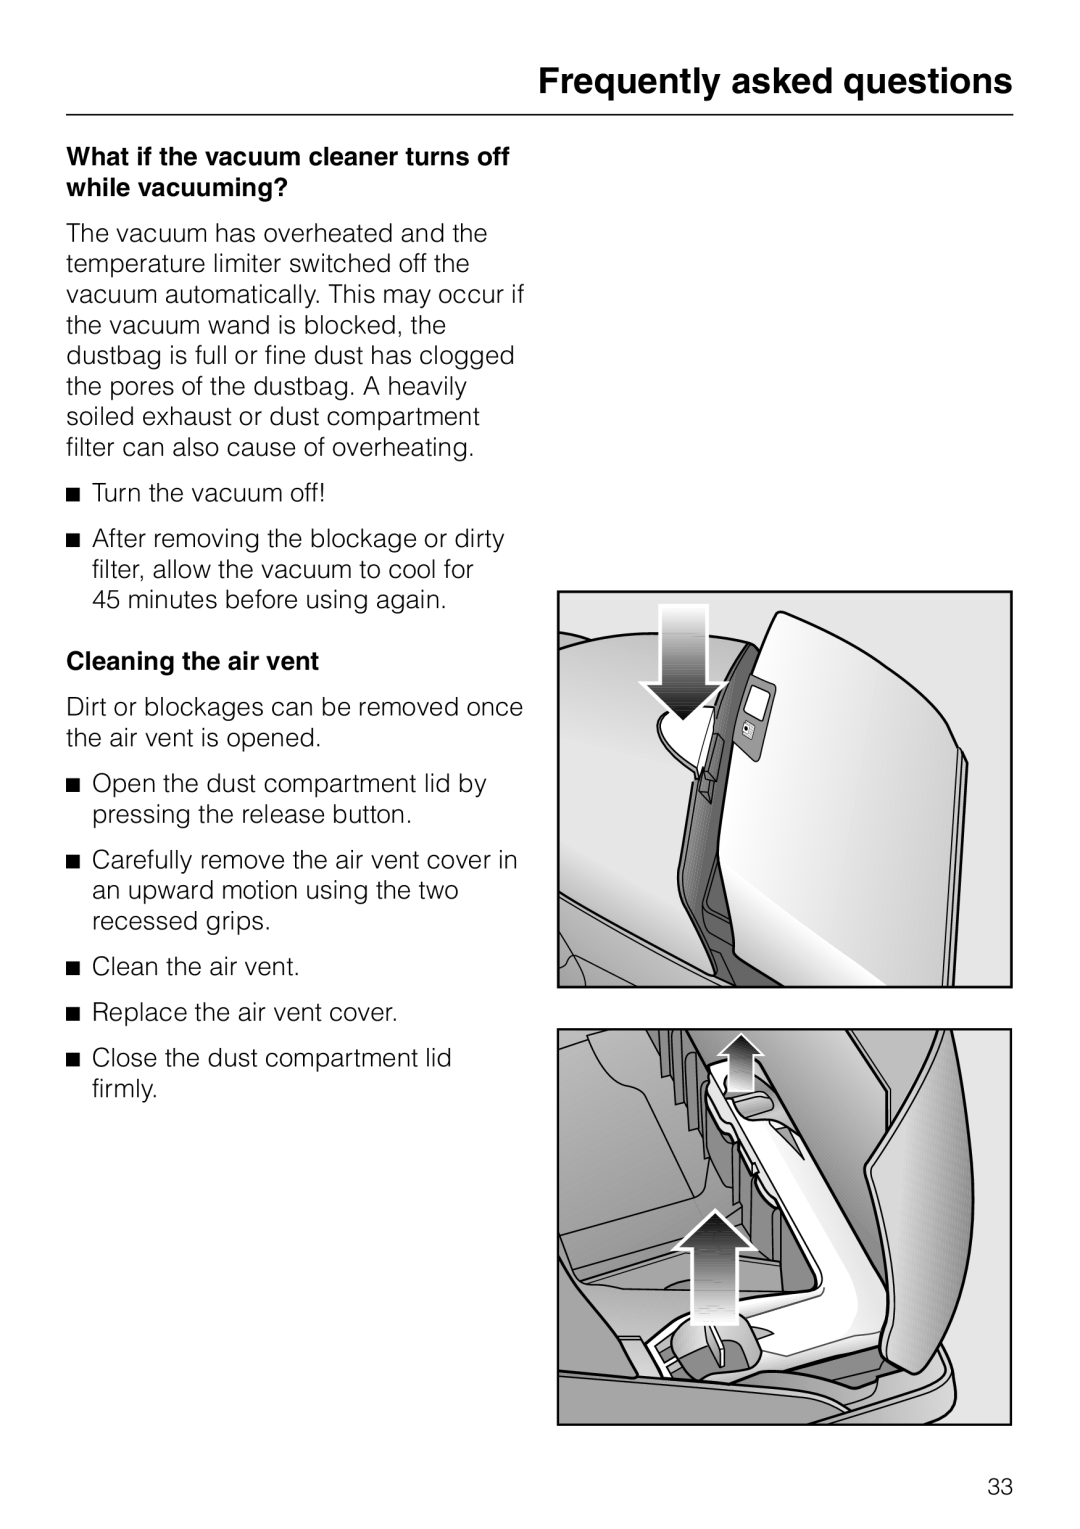 Miele HS09 operating instructions Frequently asked questions, Cleaning the air vent 